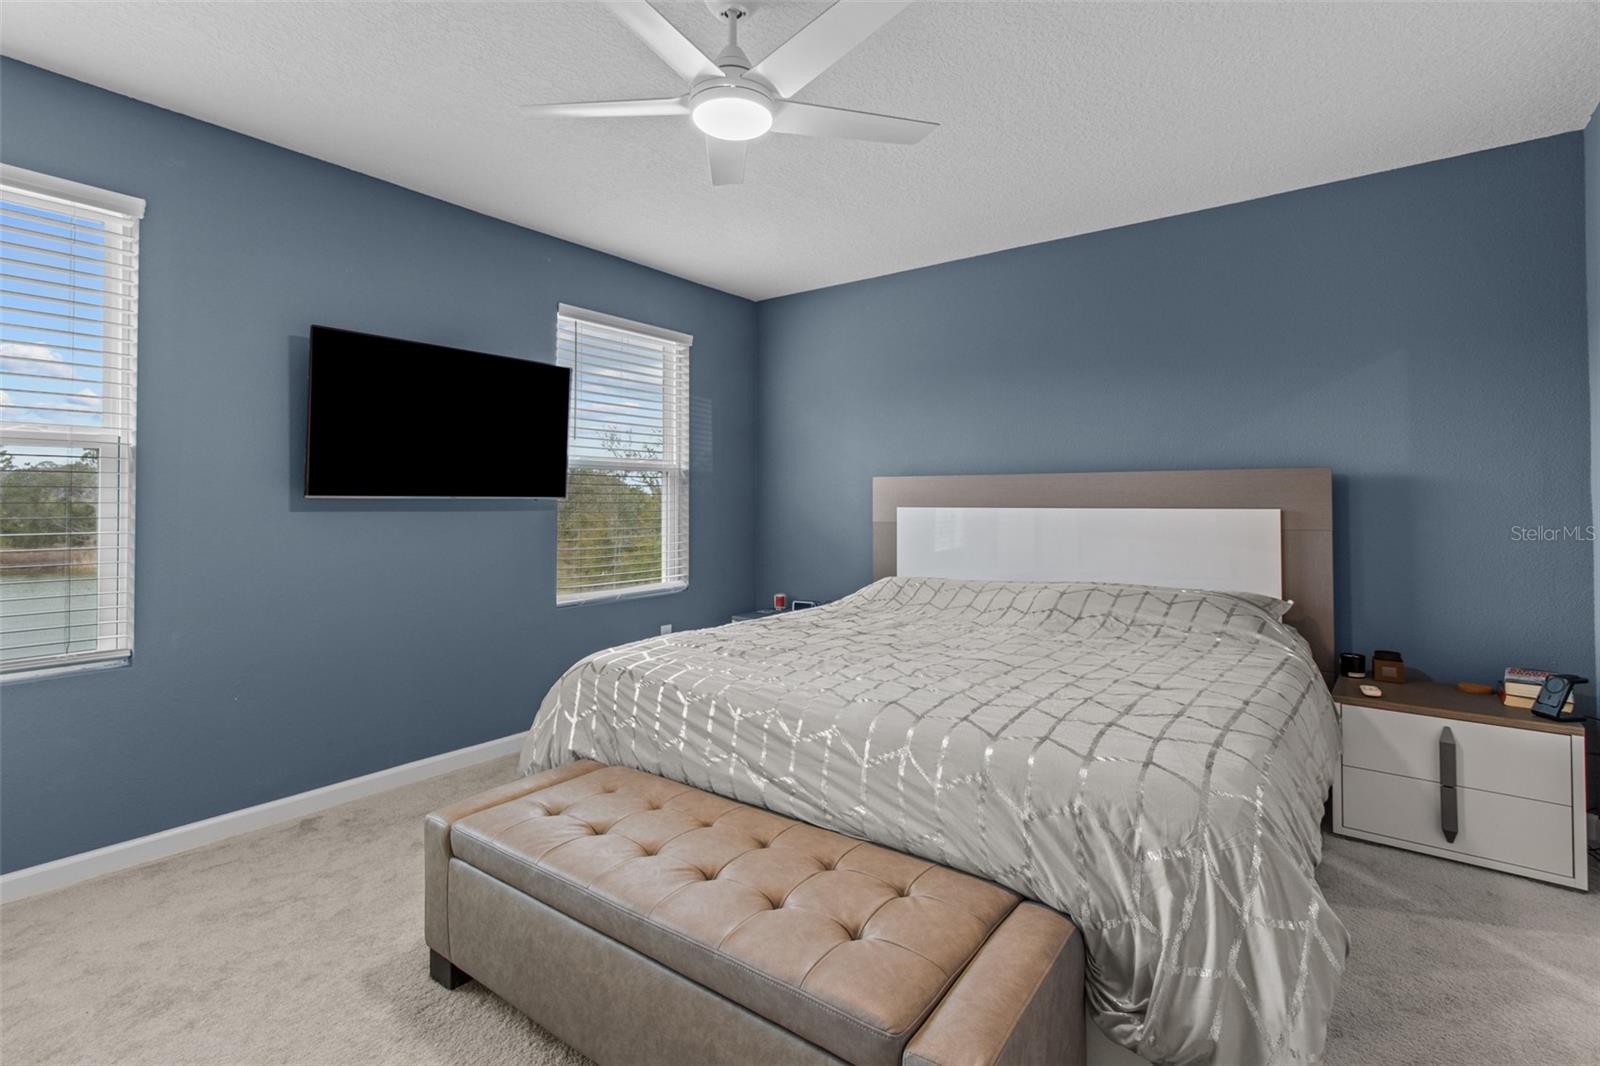 Spacious master bedroom offers plenty of natural light